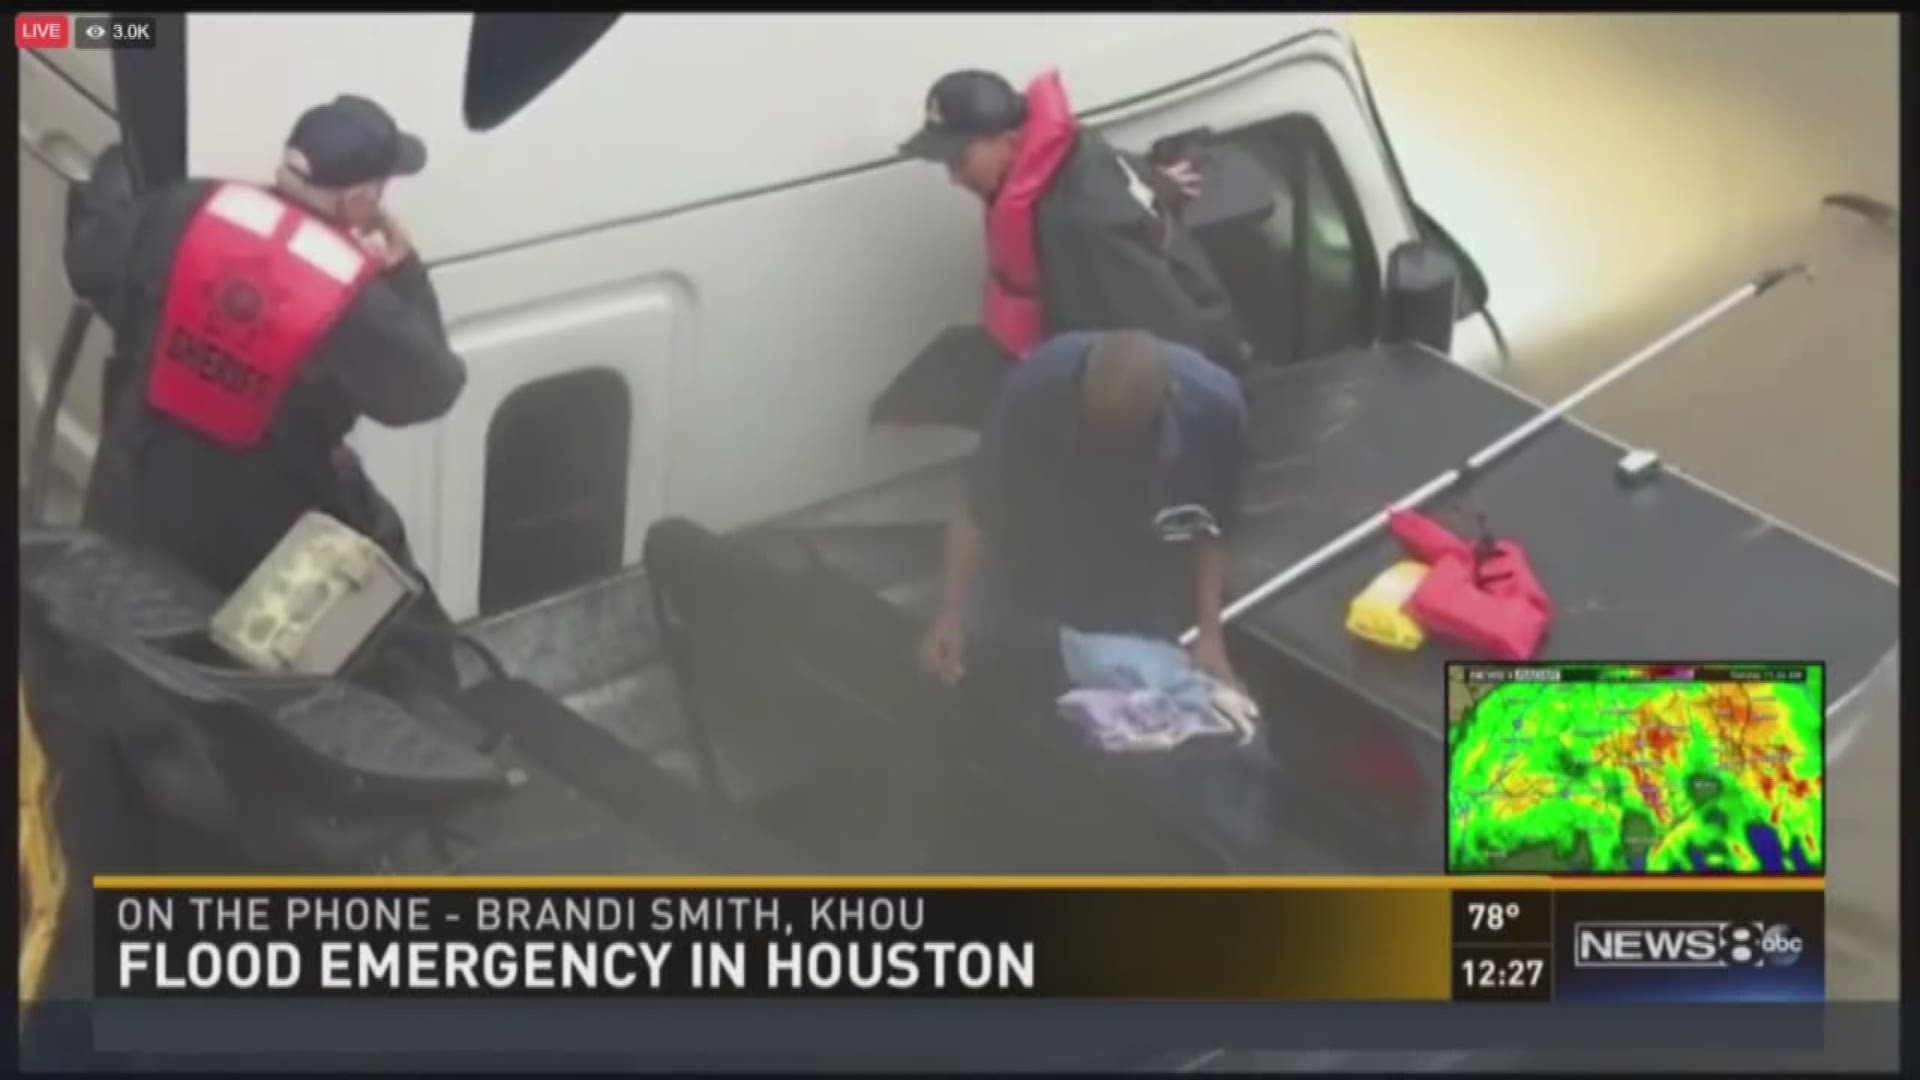 KHOU reporter Brandi Smith saw a man trapped in his flooded truck, and was able to flag down the police, who later rescued him.